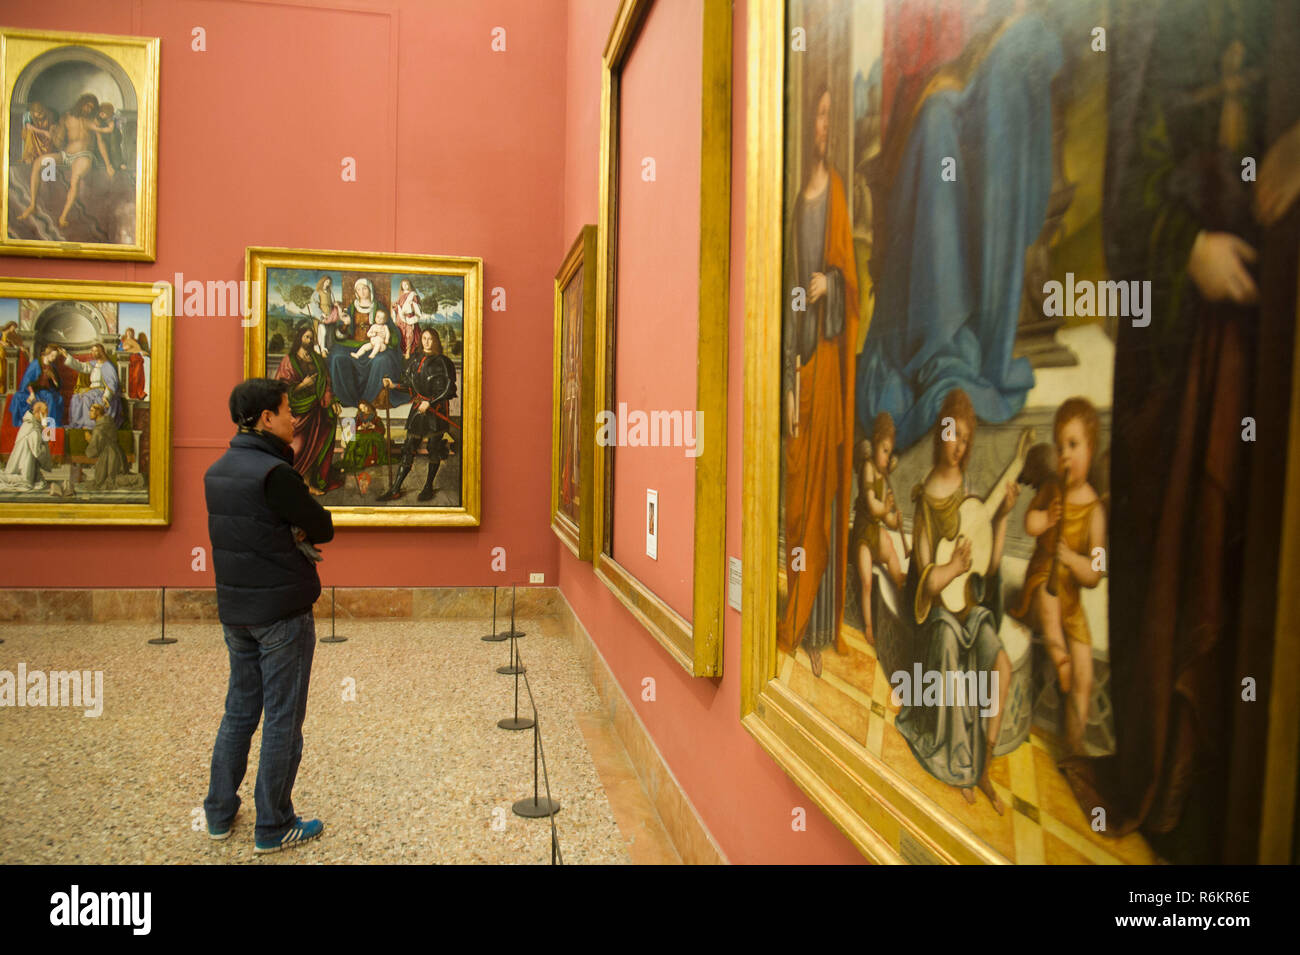 Italy, Milan, exhibition halls of the Palazzo Brera Gallery and home to the Academy of Fine Arts. Stock Photo